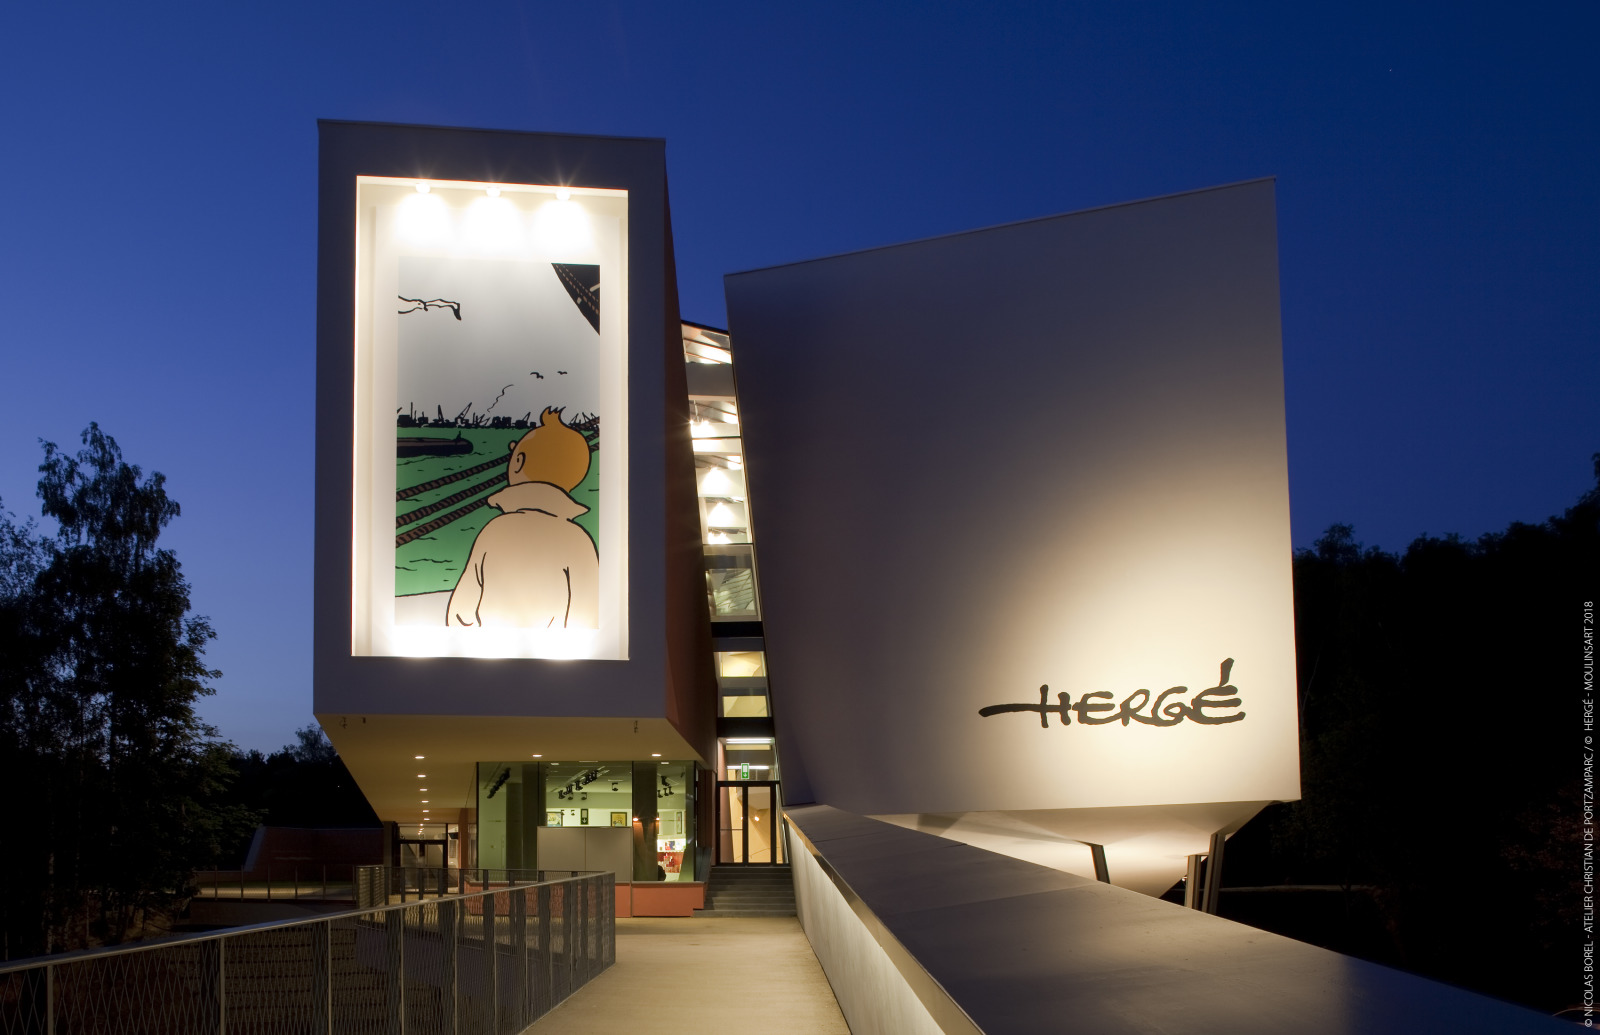 Night view of the outside of the Hergé Museum in Louvain-la-Neuve